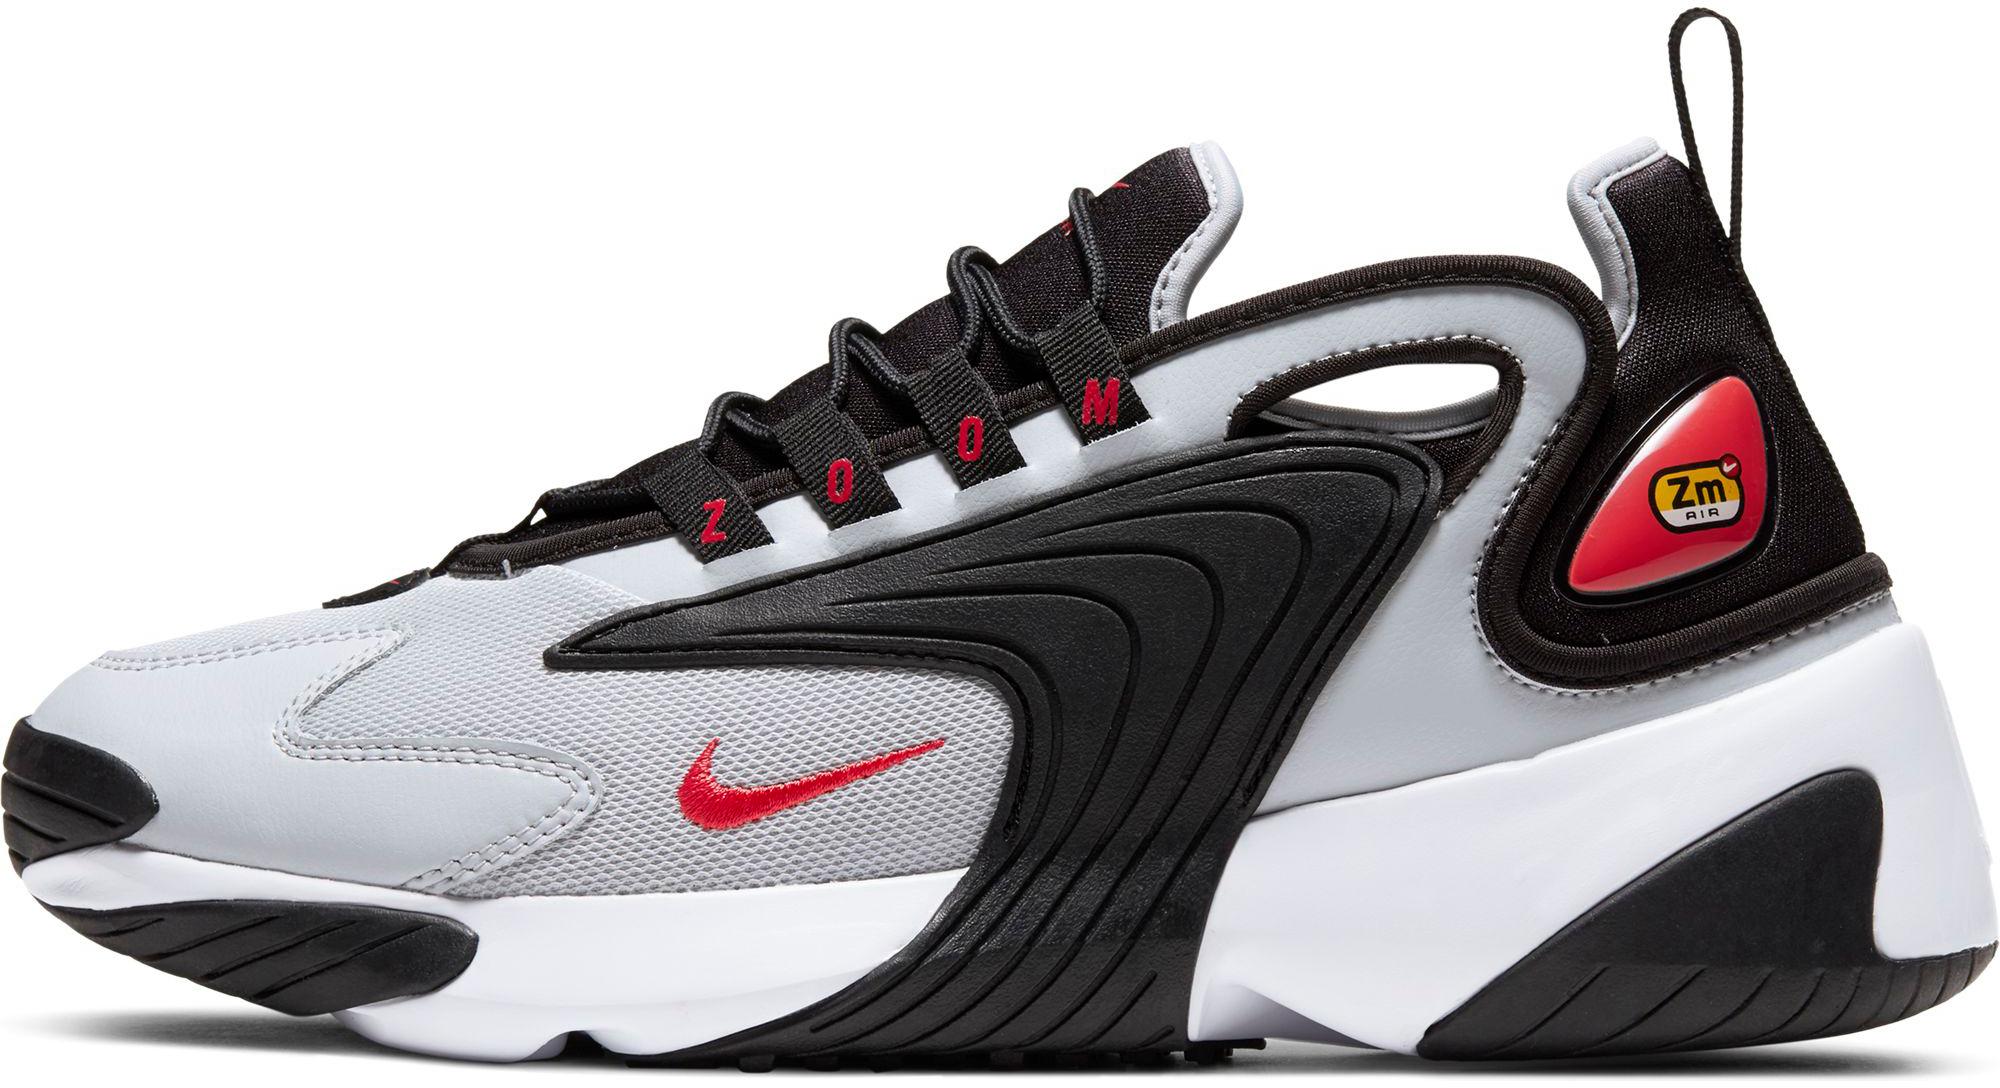 nike zoom 2k red and grey